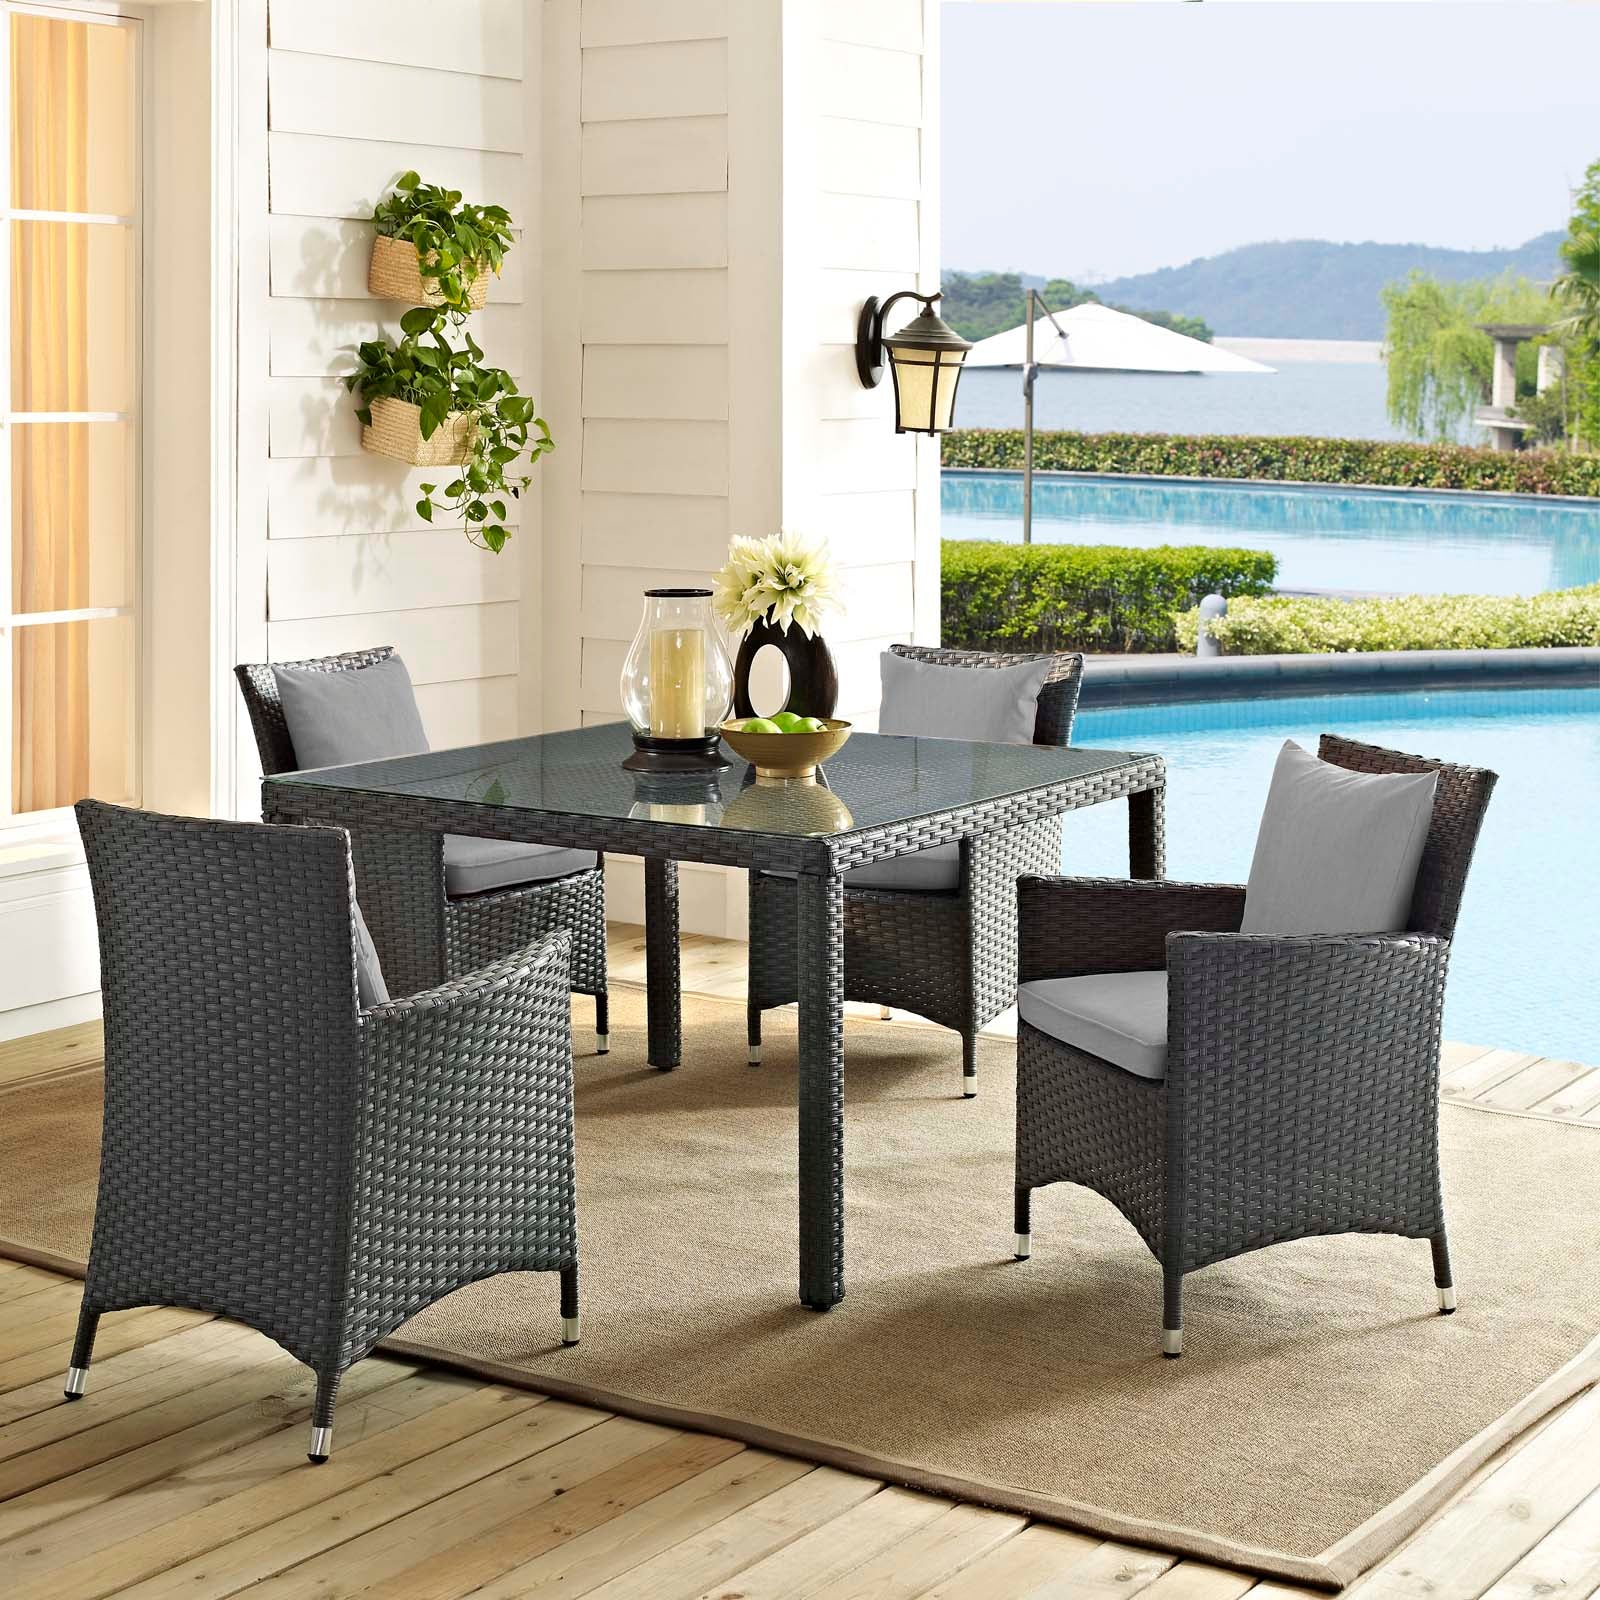 Sojourn 4 Piece Outdoor Patio Sunbrella® Dining Set - East Shore Modern Home Furnishings